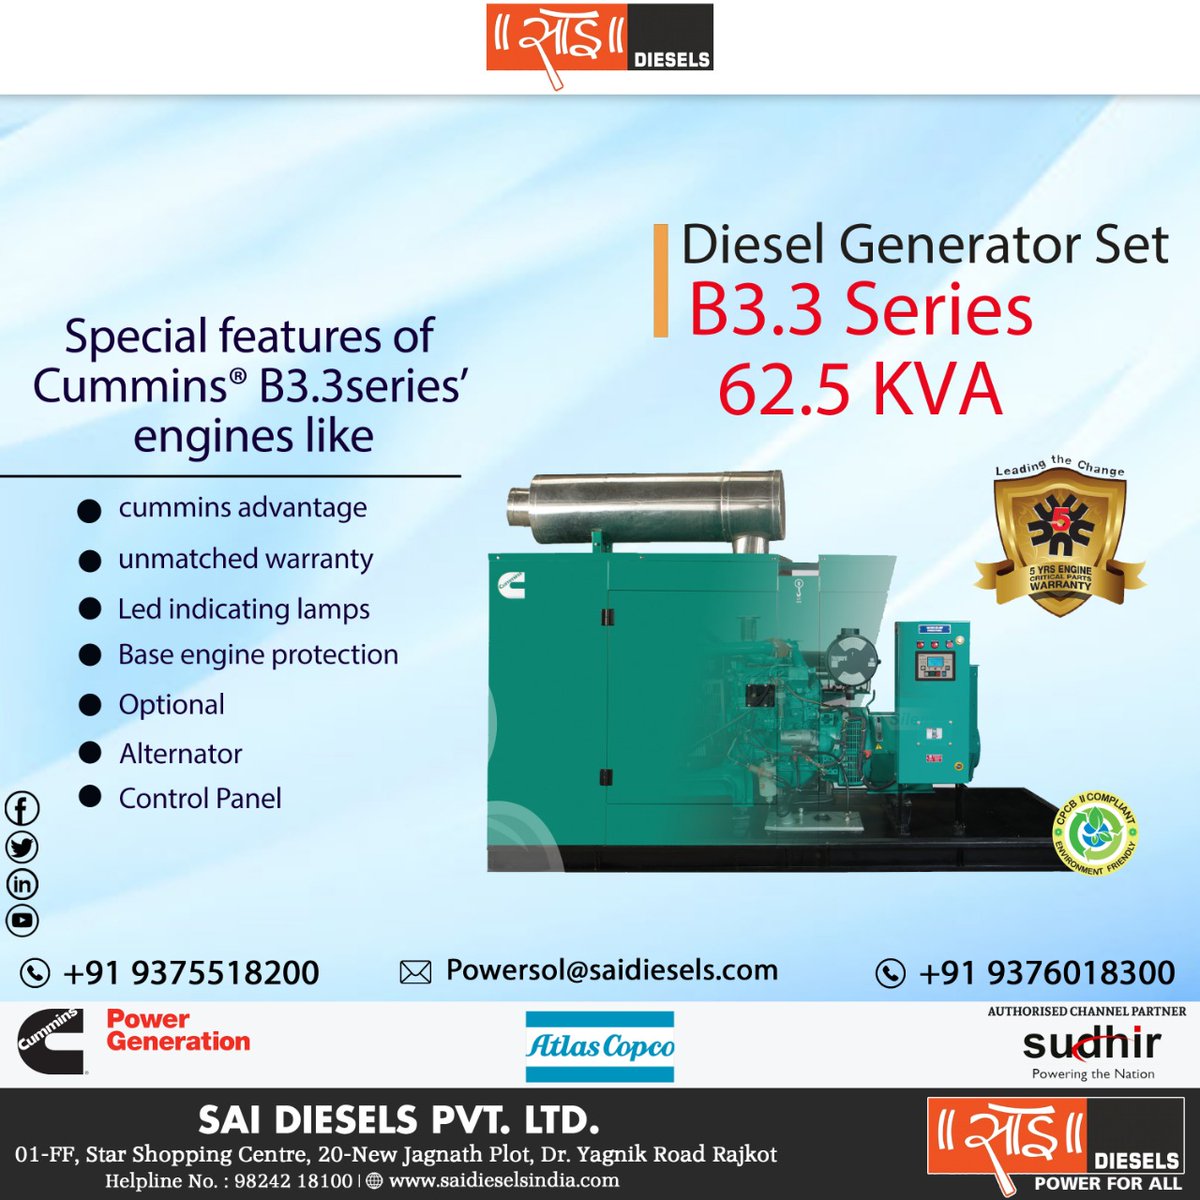 If you want a good generator with a limited budget
Kindly Contact us : 9375518200/9376018300

#sai #saidiesels #dieselgenerator #generatorservices #snapon #atlascopco #generatorpower #cumminsdiesel #madeinindiaproducts #PowerBackup #powersolutions #YAGNIKROAD #rajkot #Gujarat